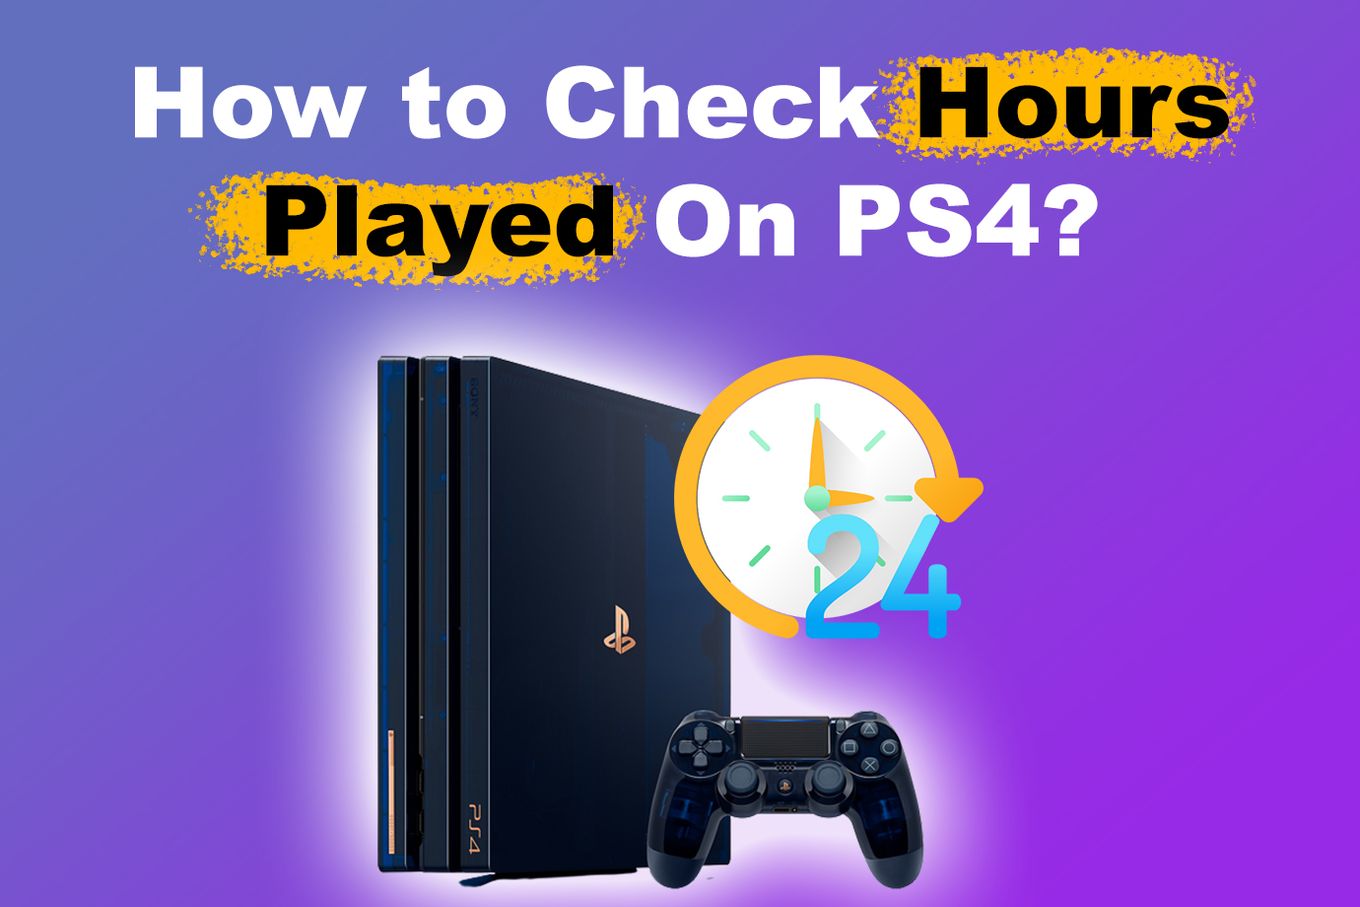 How to Check Hours Played On PS4